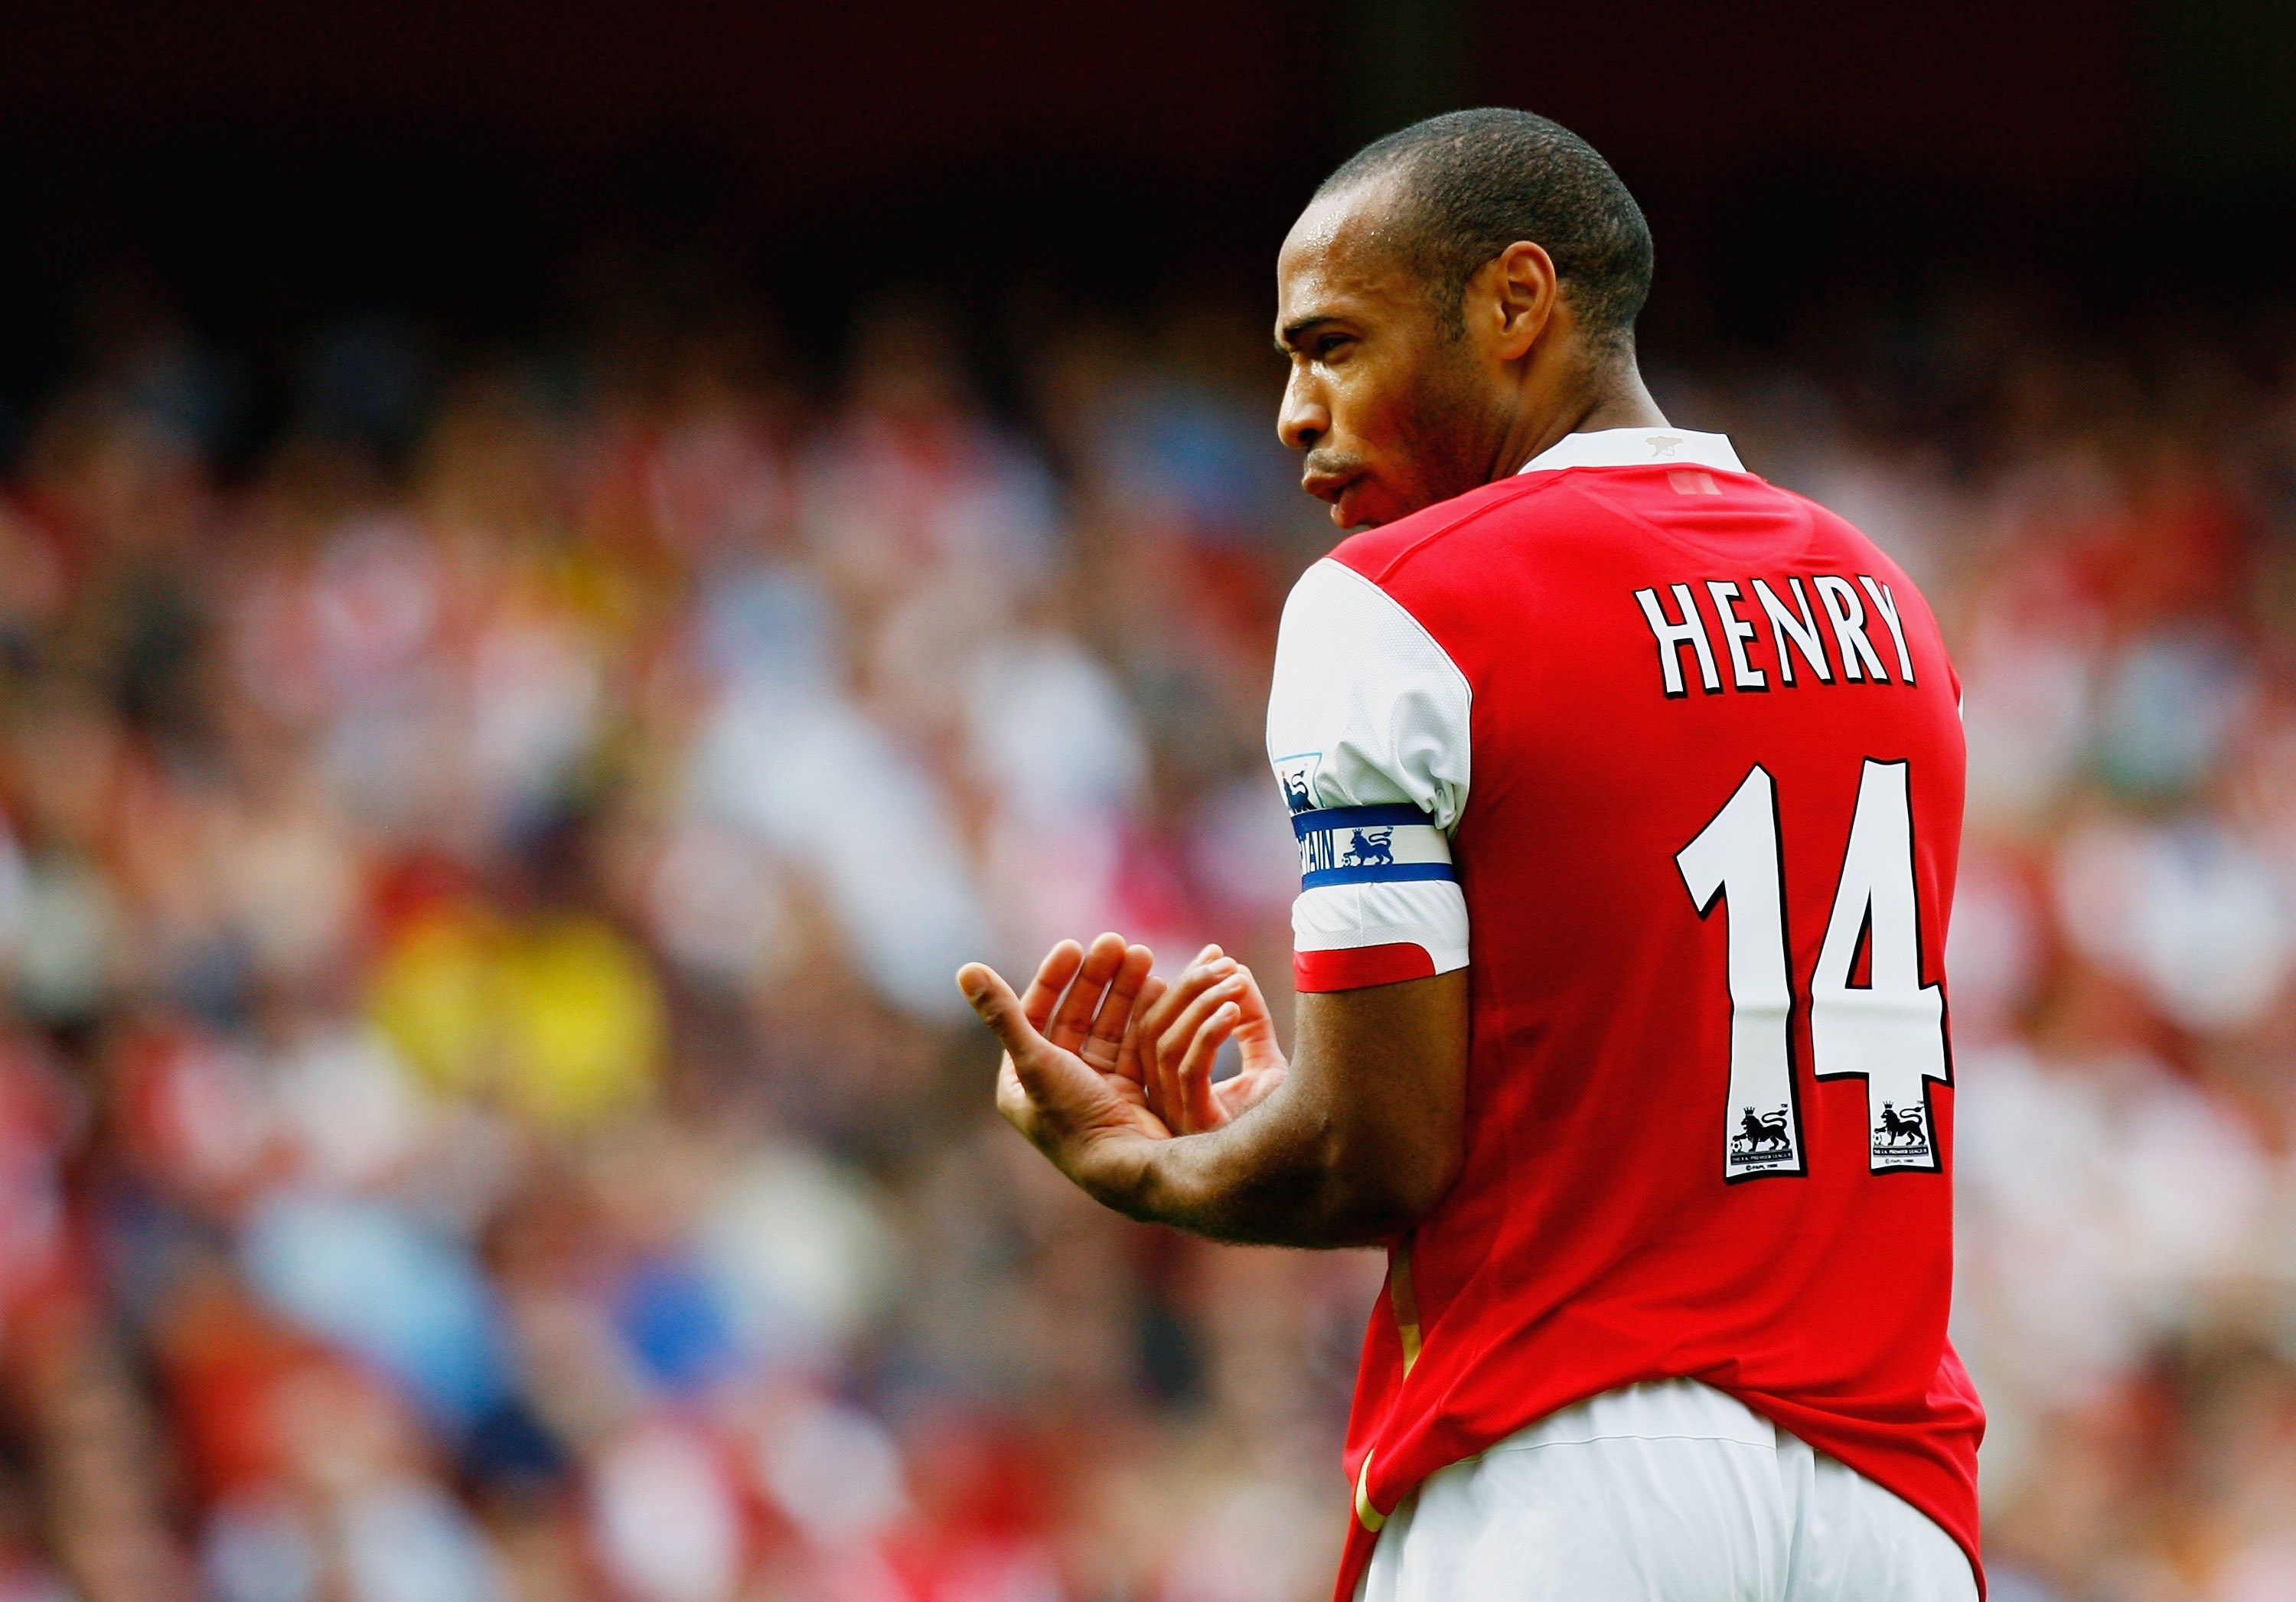 Thierry Henry photo #348566